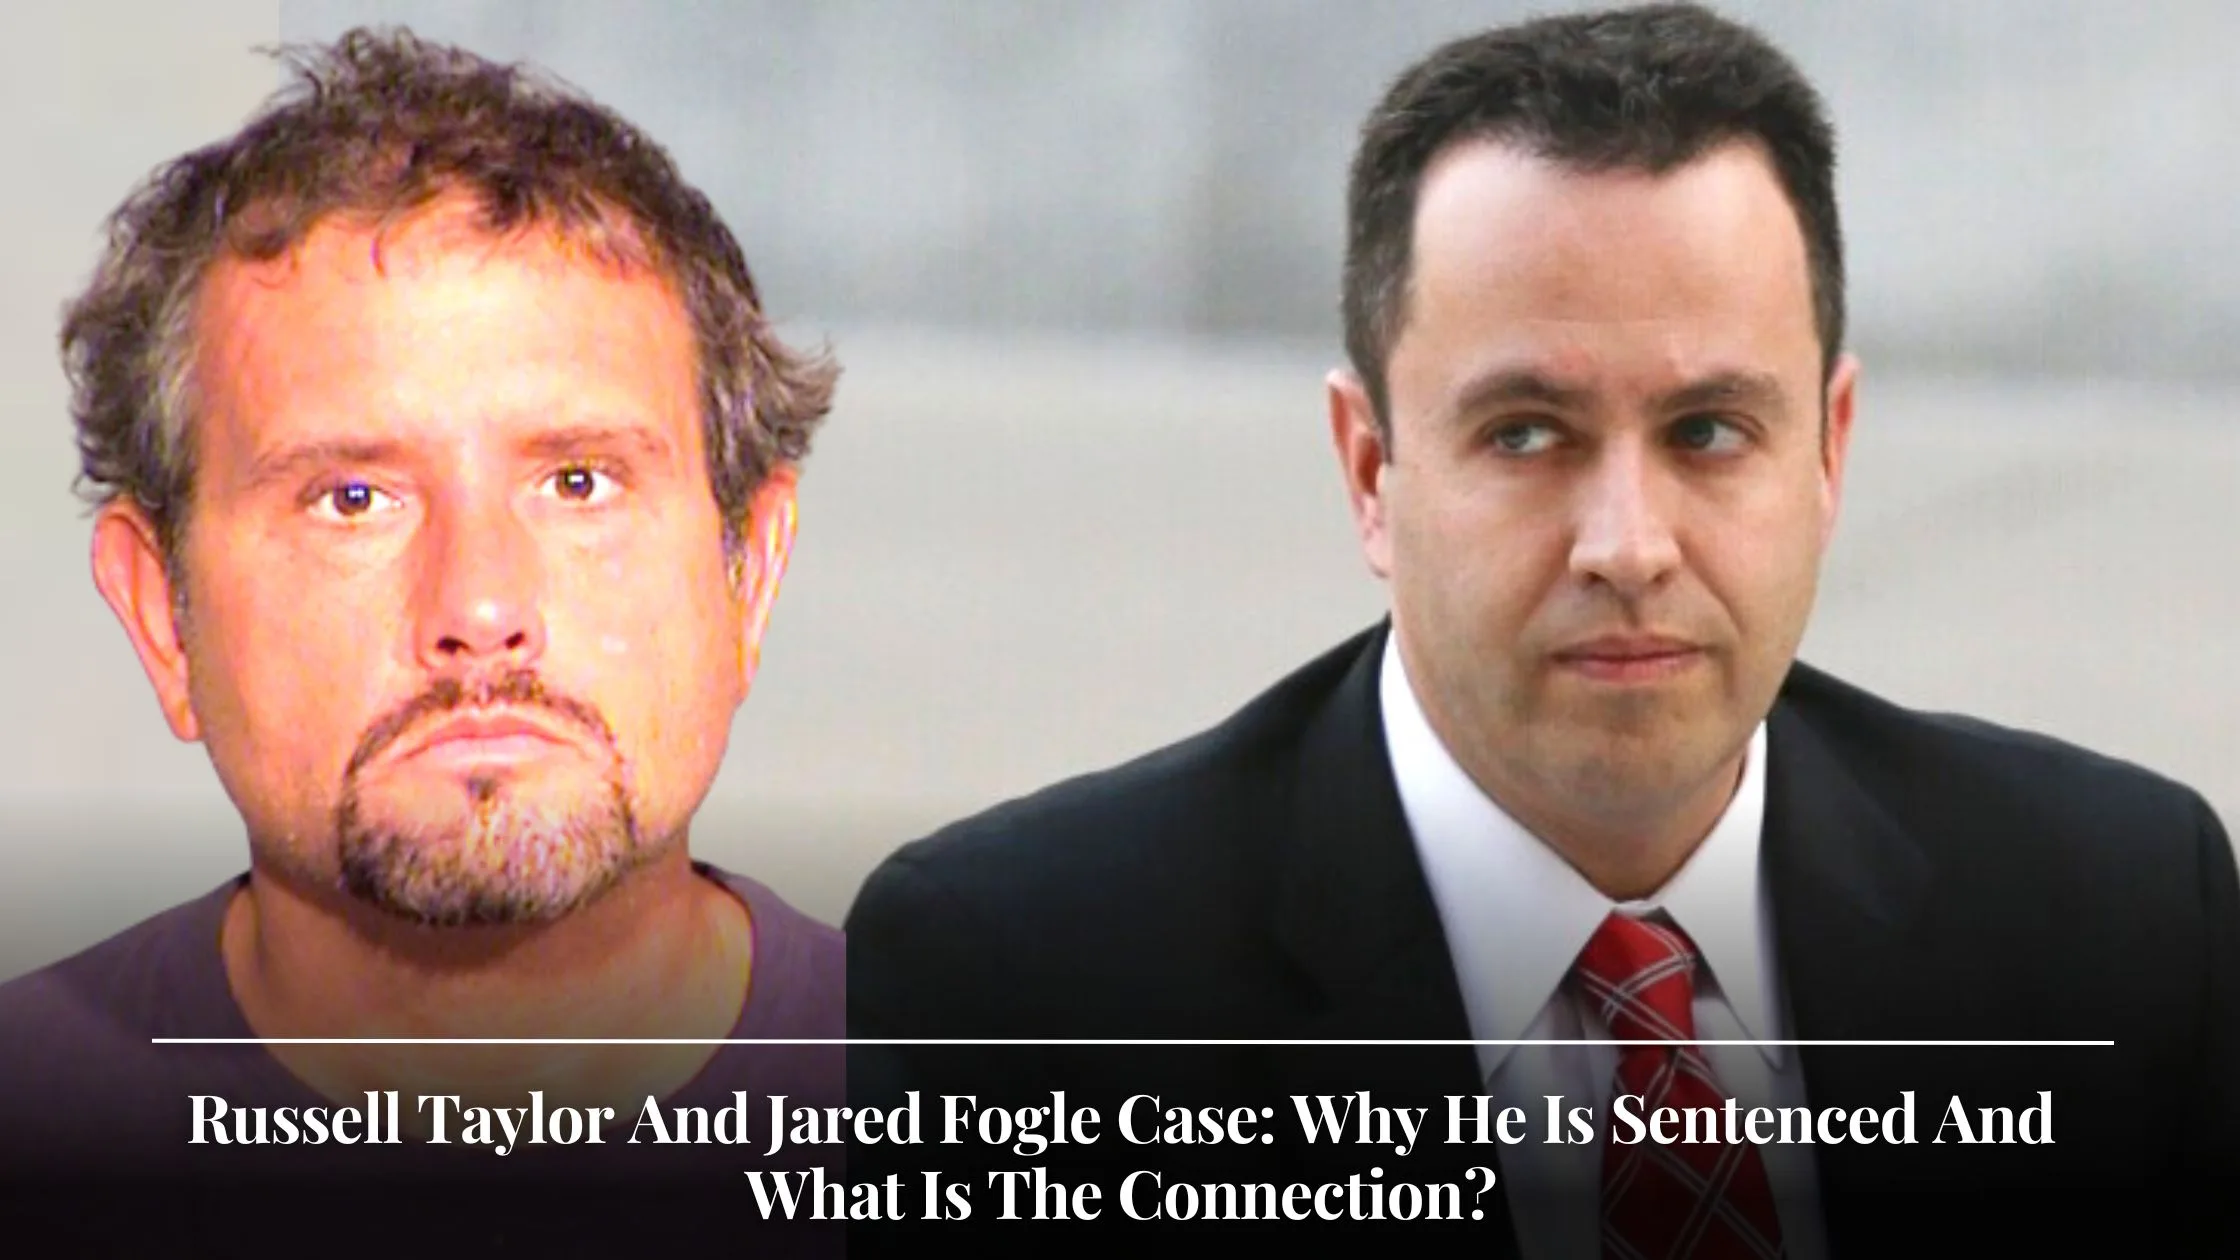 Russell Taylor And Jared Fogle Case Why He Is Sentenced And What Is The Connection